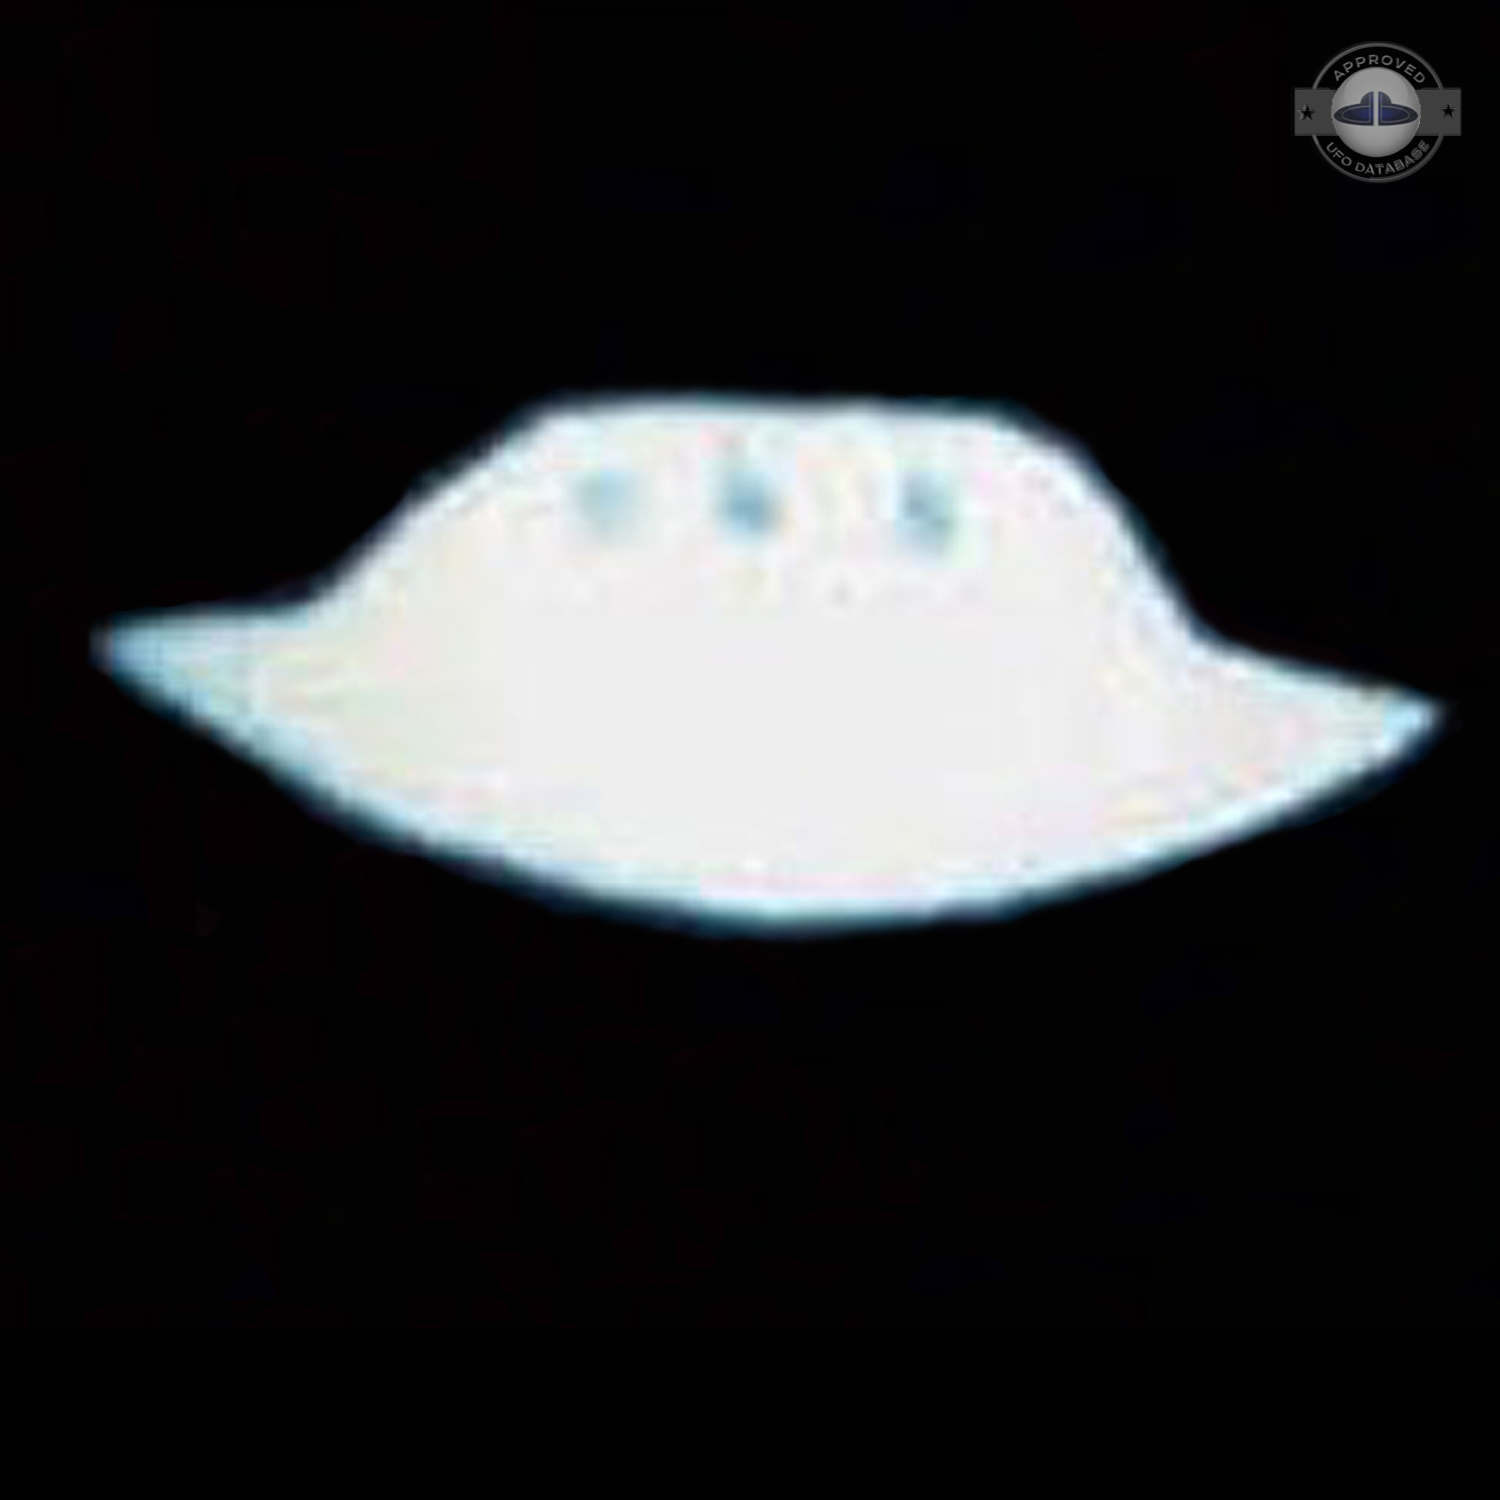 Iran 1978 UFO picture released under the Freedom of Information Act UFO Picture #231-3